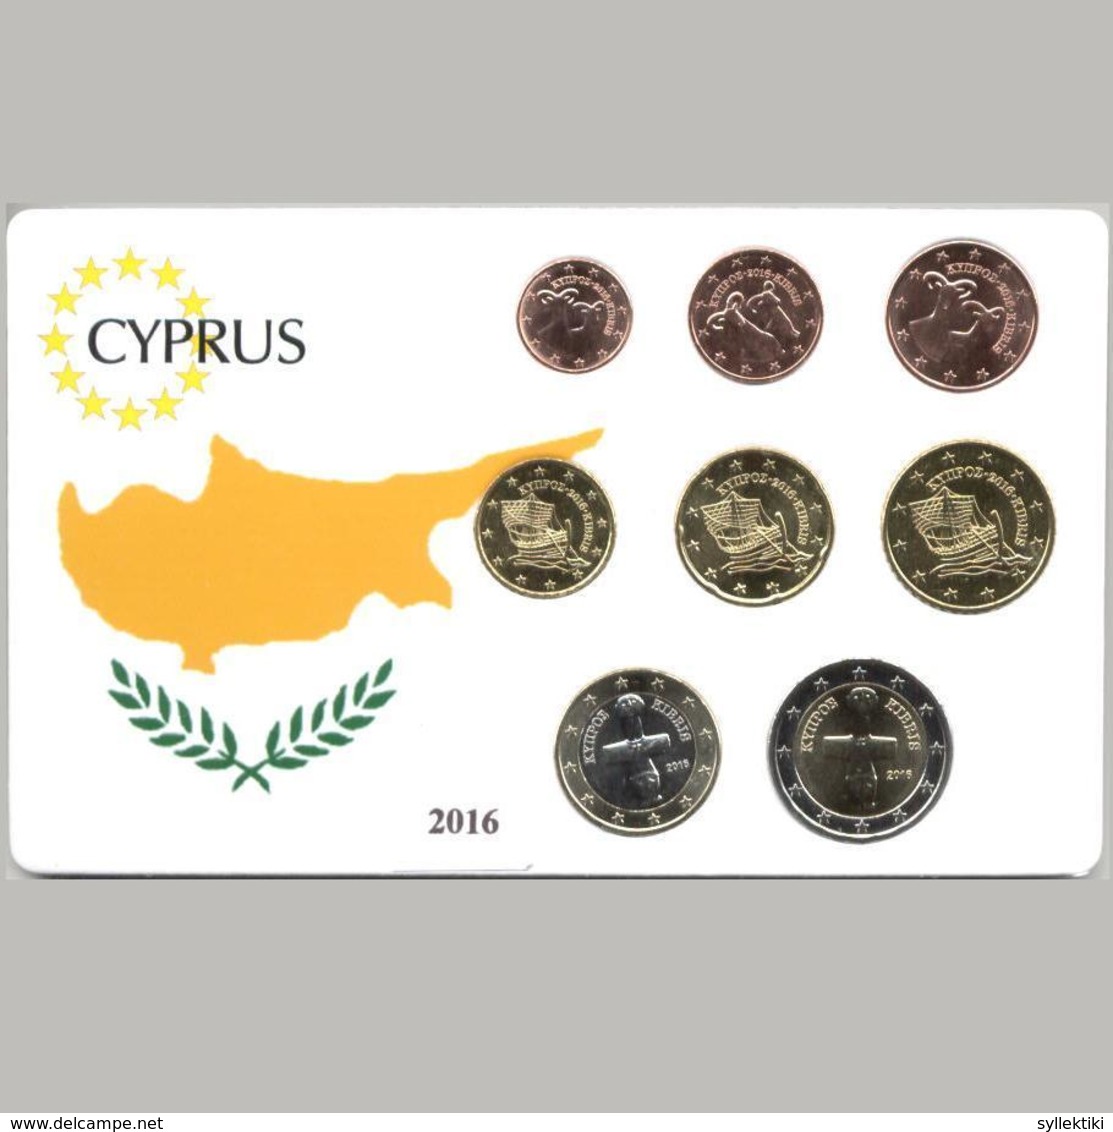 CYPRUS 2016 COMPLETE EURO COINS SET UNC IN NICE PACKING - Cyprus